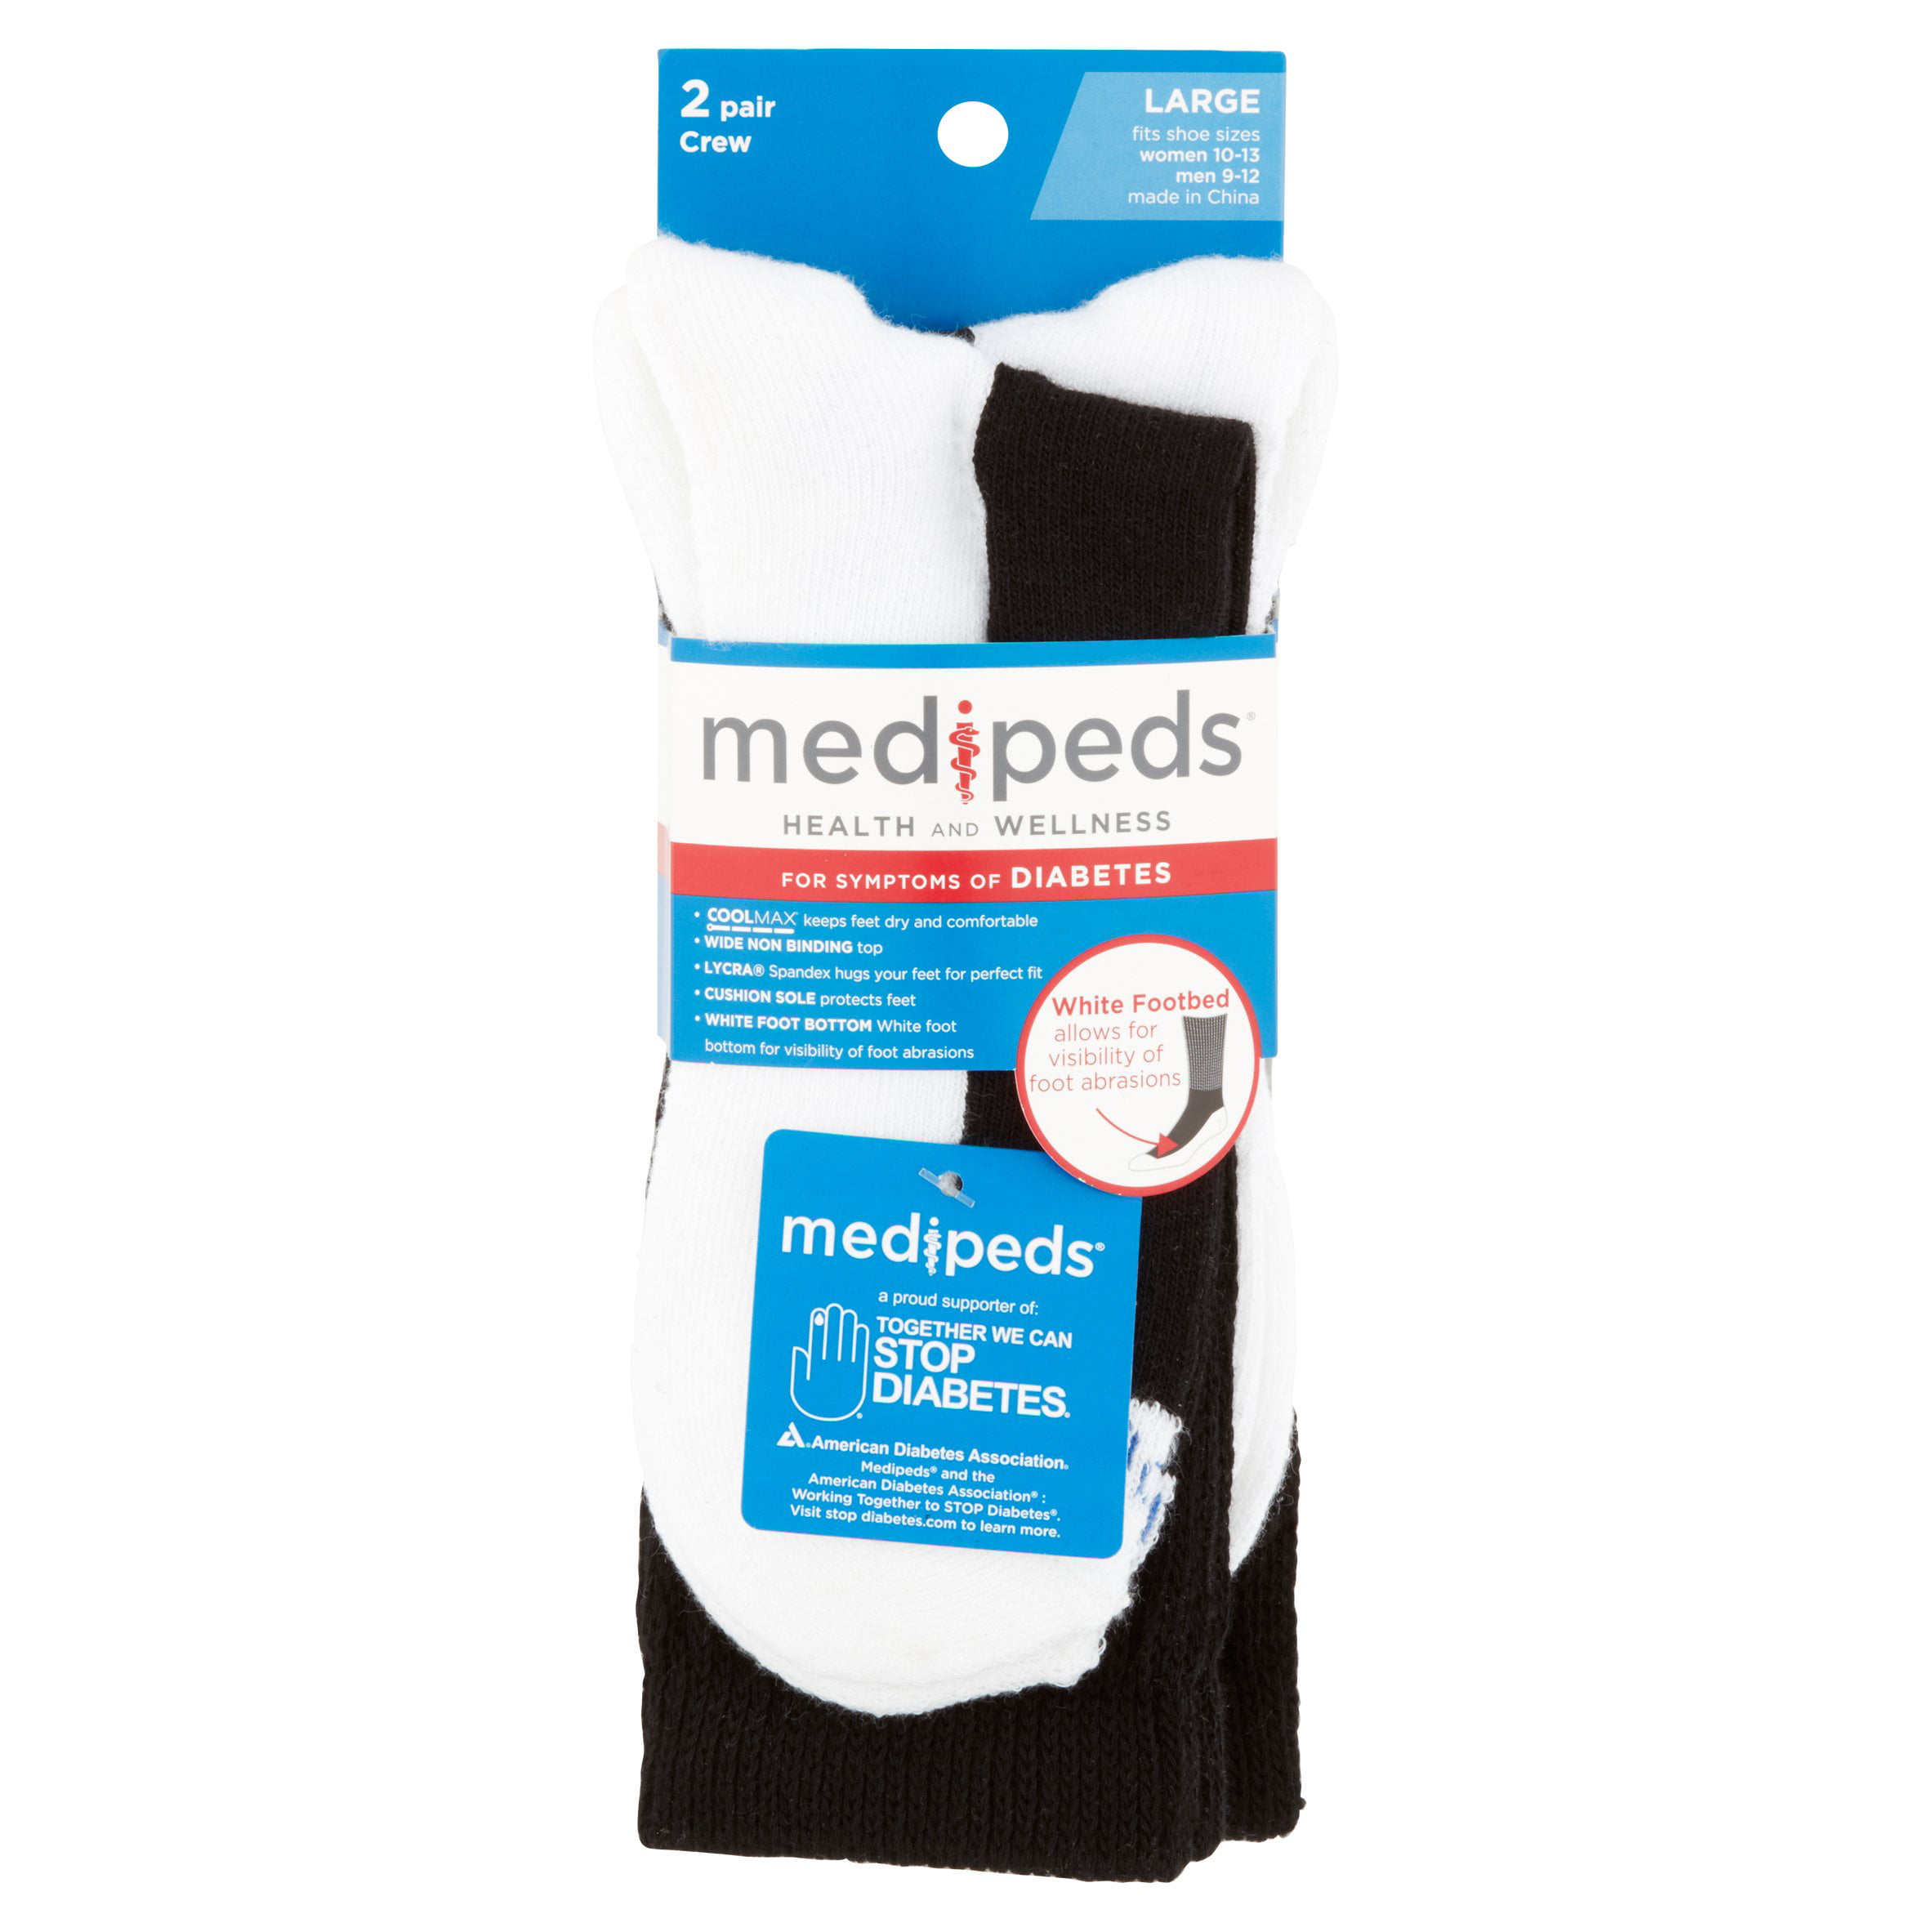 Medipeds Health and Wellness Black w/ White Large Crew Socks, 2 count ...